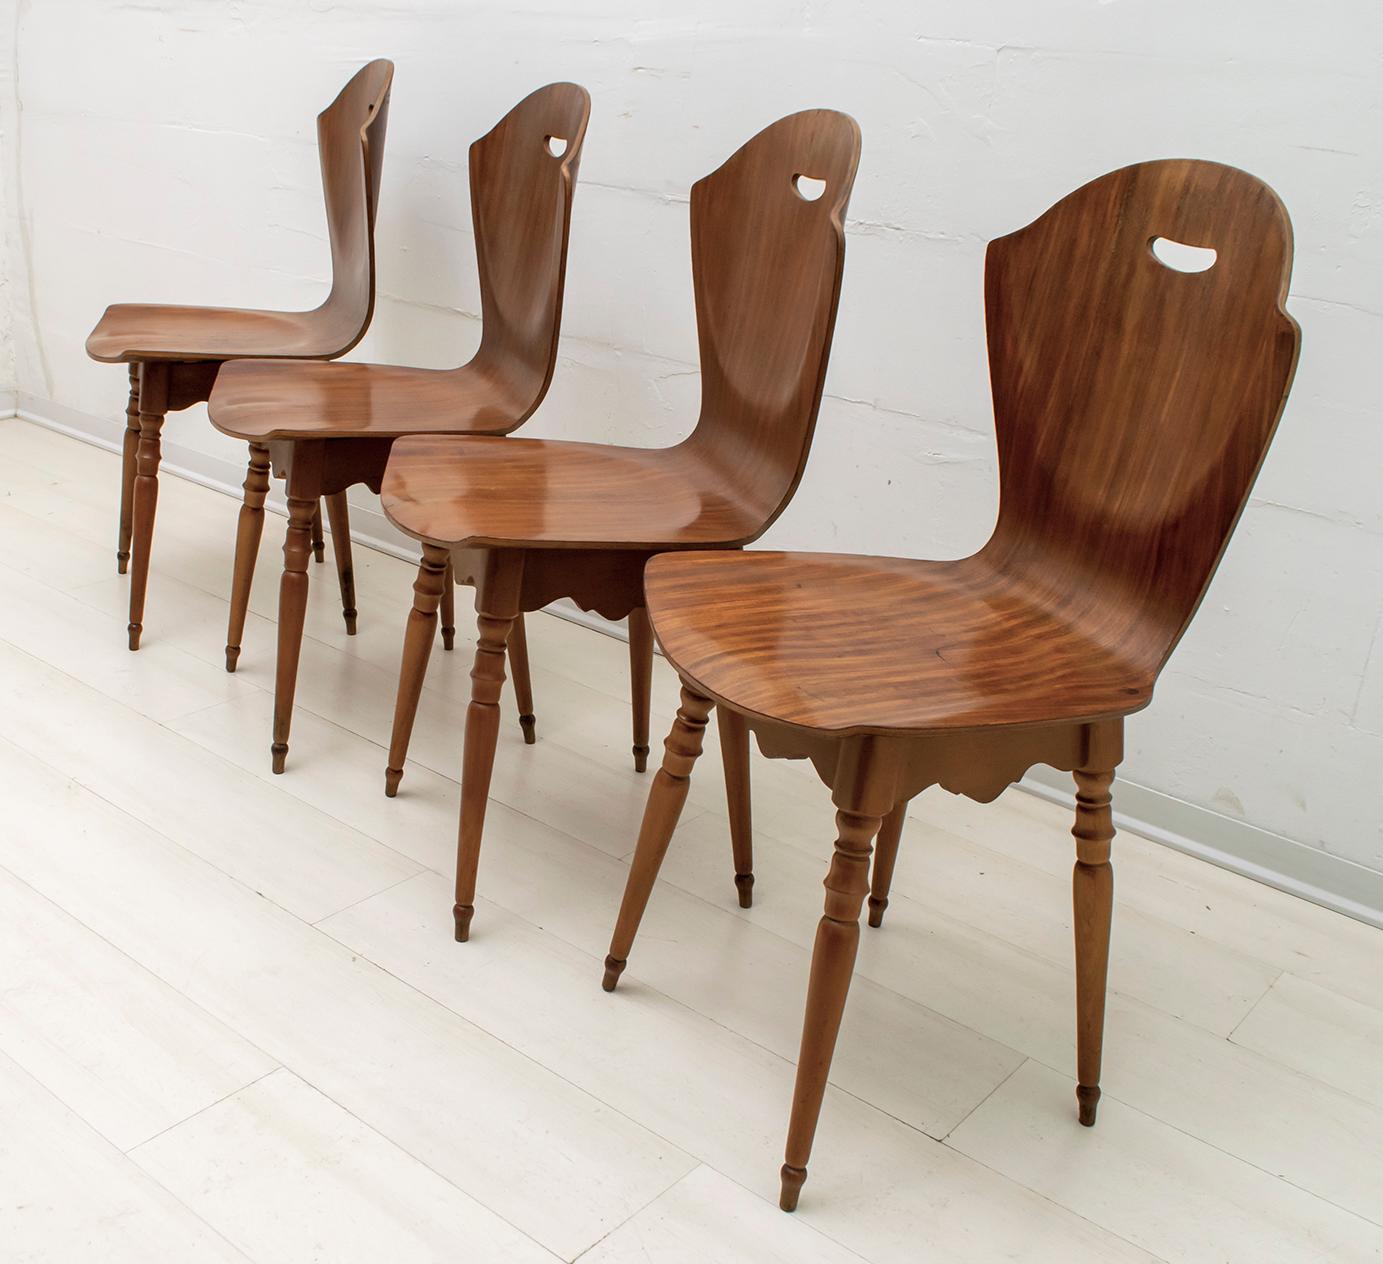 Mid-20th Century After Carlo Ratti Mid-Century Modern Italian Bentwood Chairs, 1950s For Sale